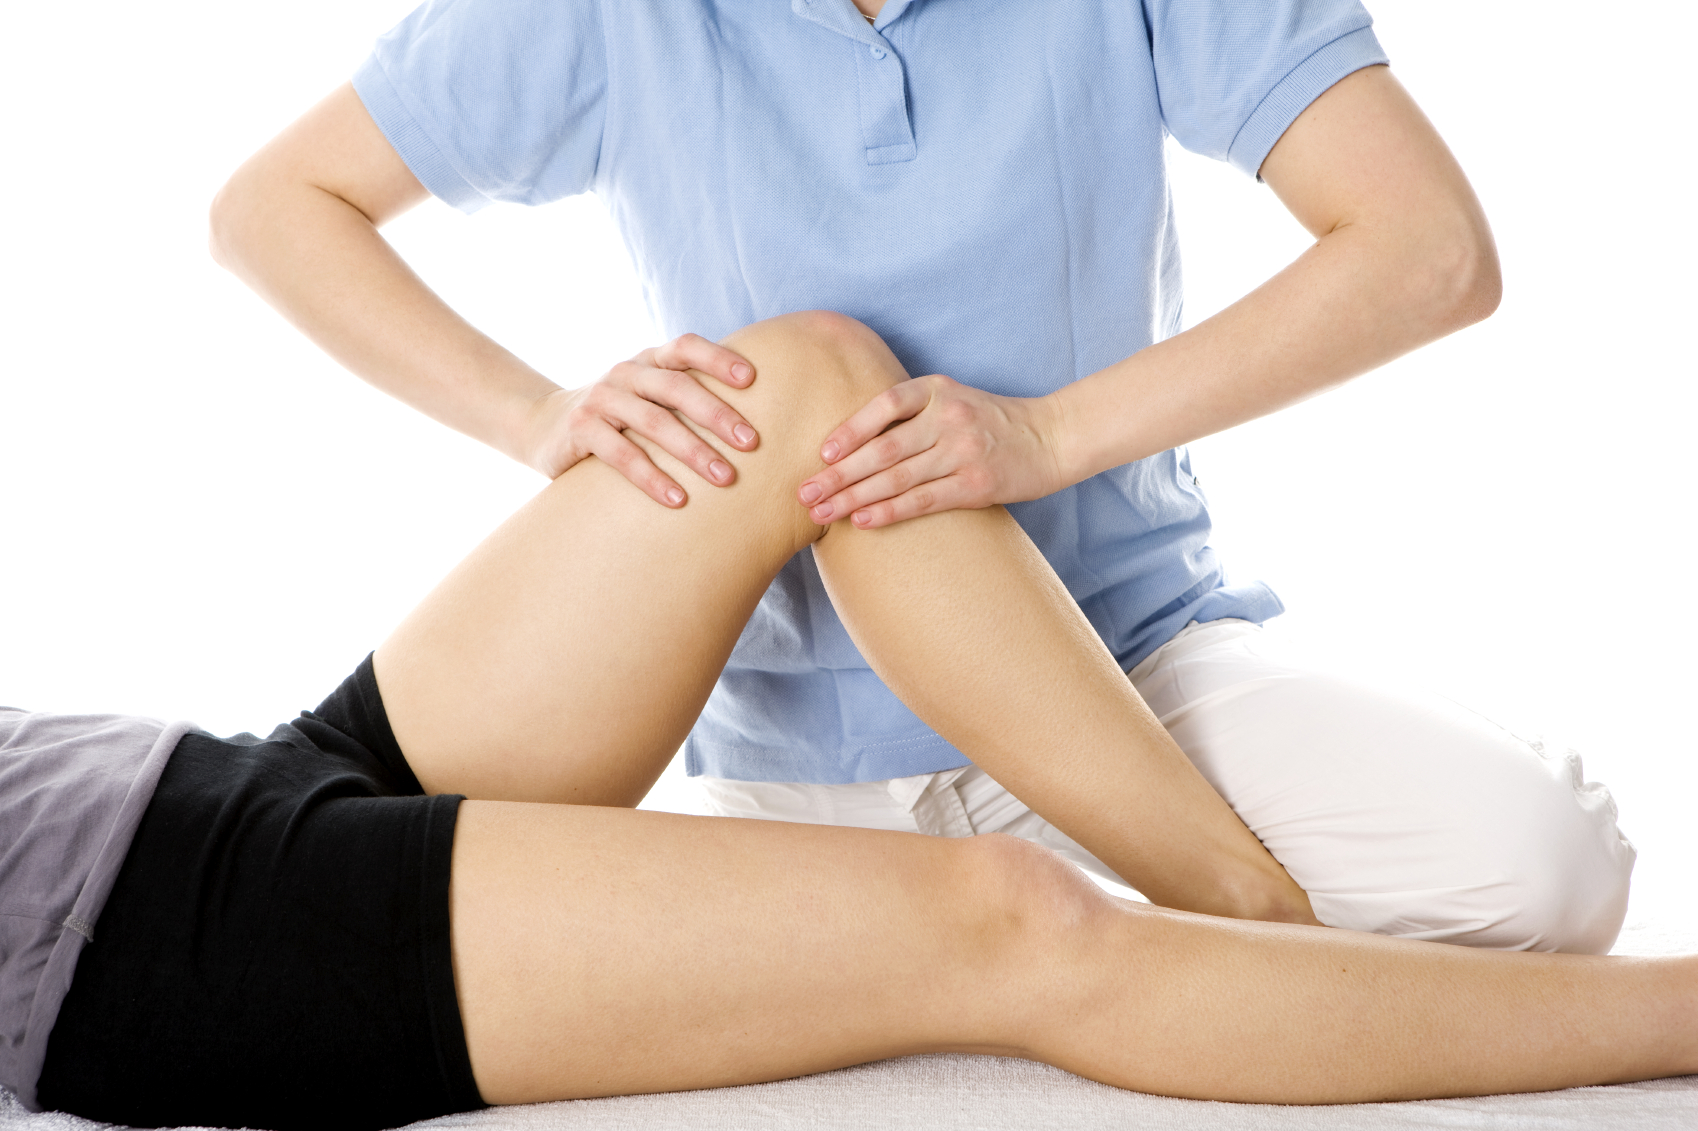 Why is Physiotherapy Used?